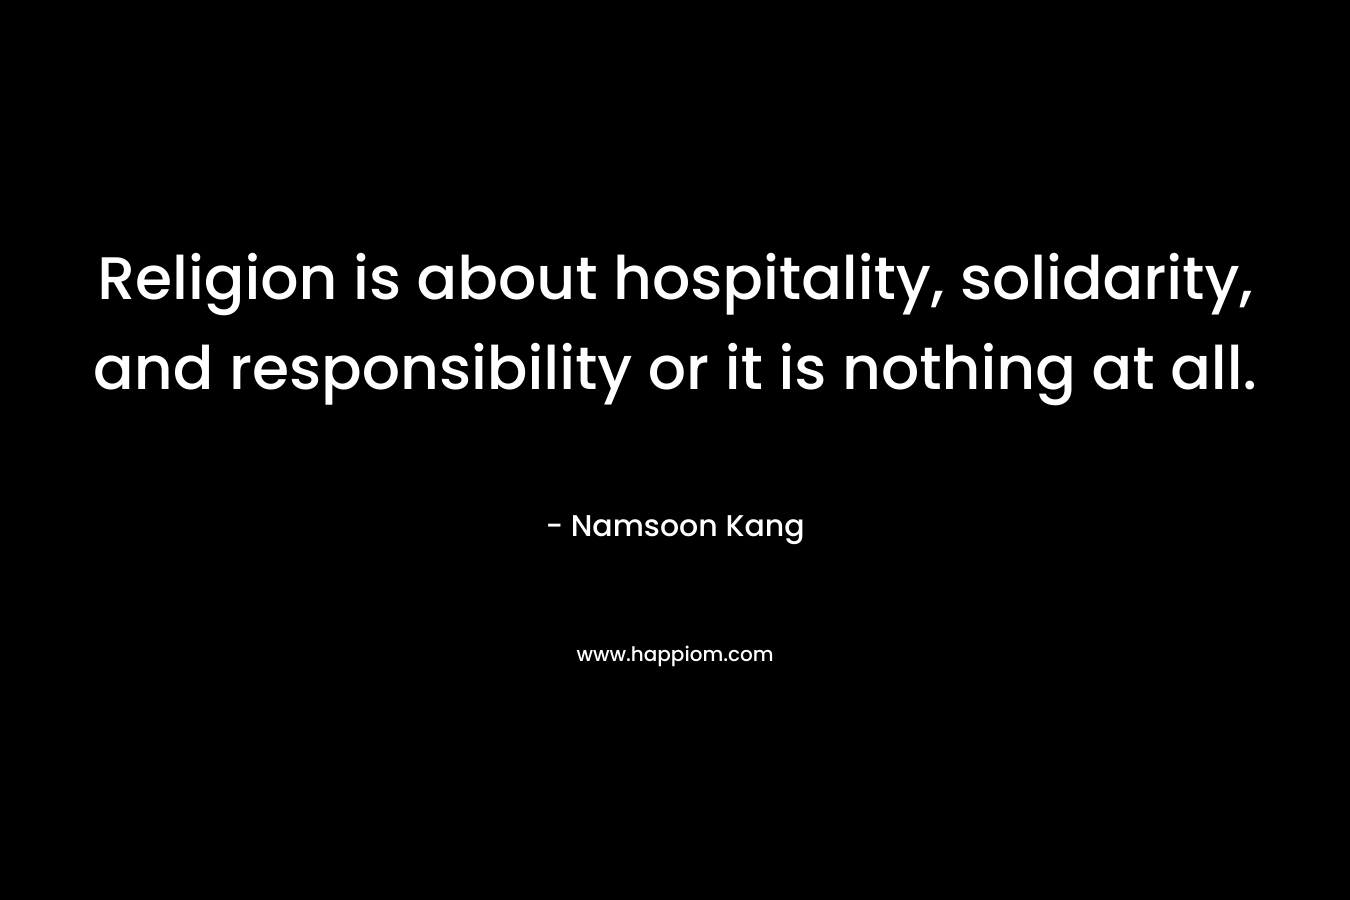 Religion is about hospitality, solidarity, and responsibility or it is nothing at all.